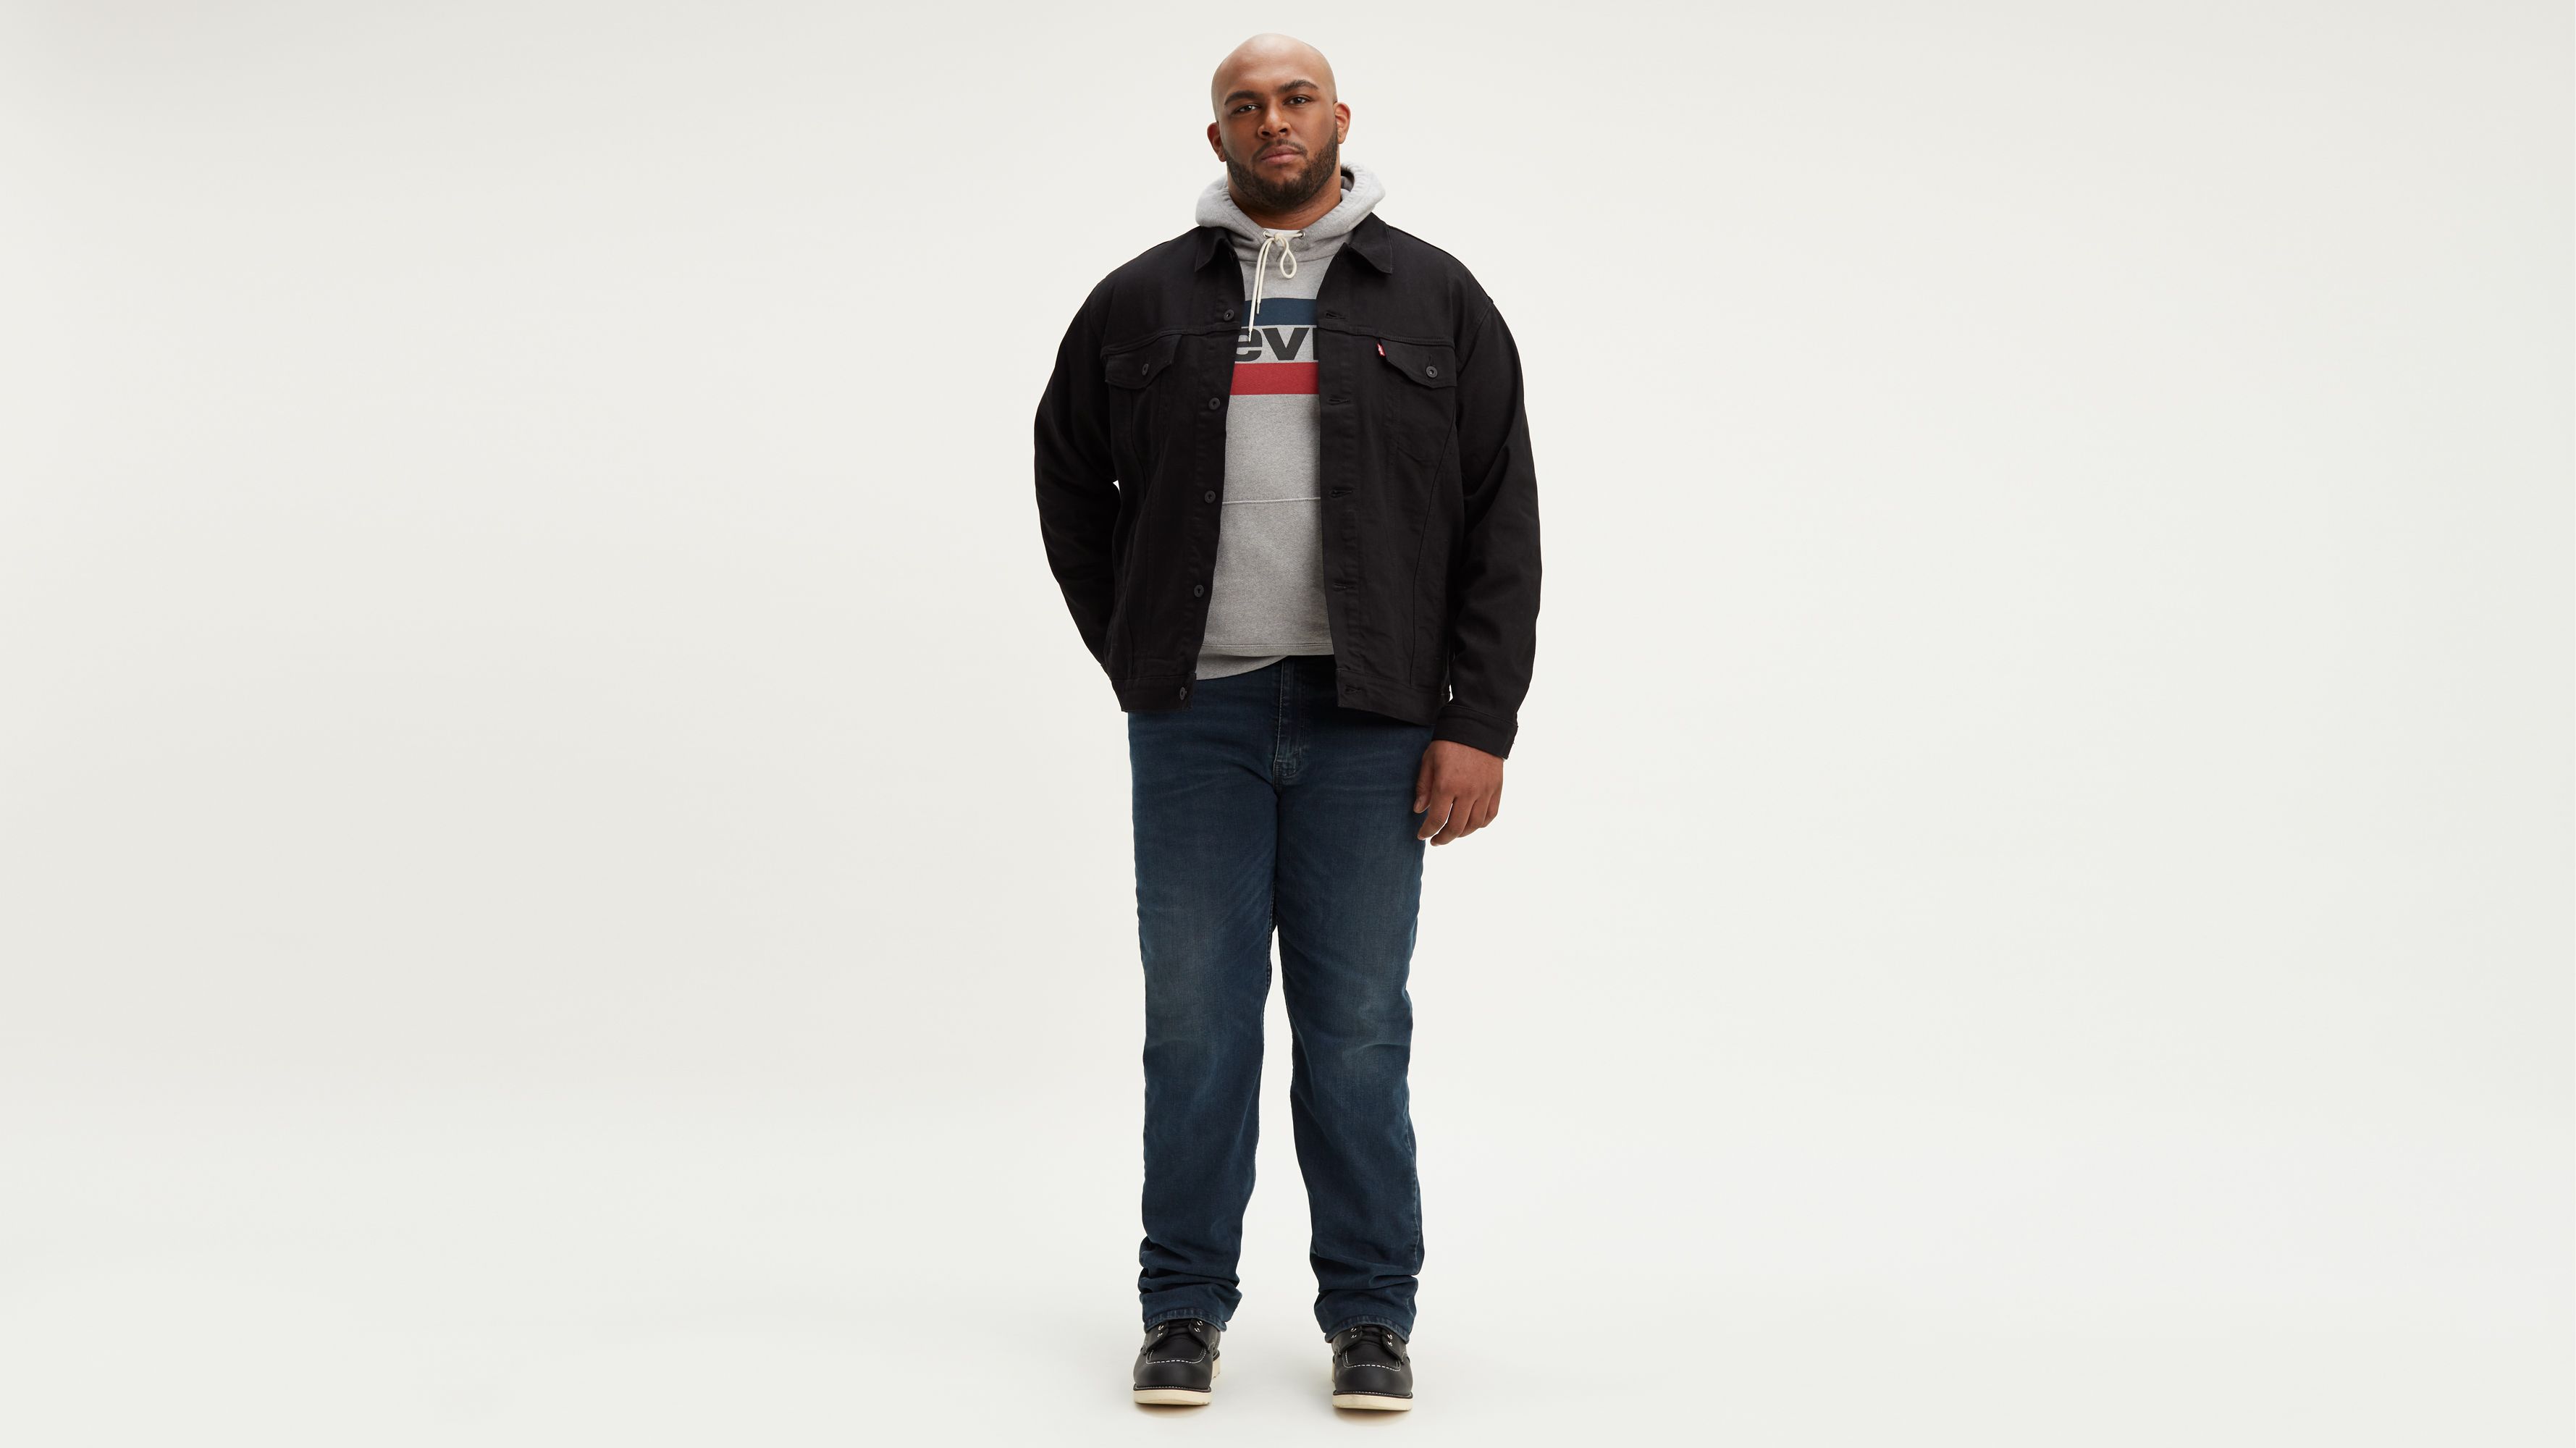 levis 514 big and tall